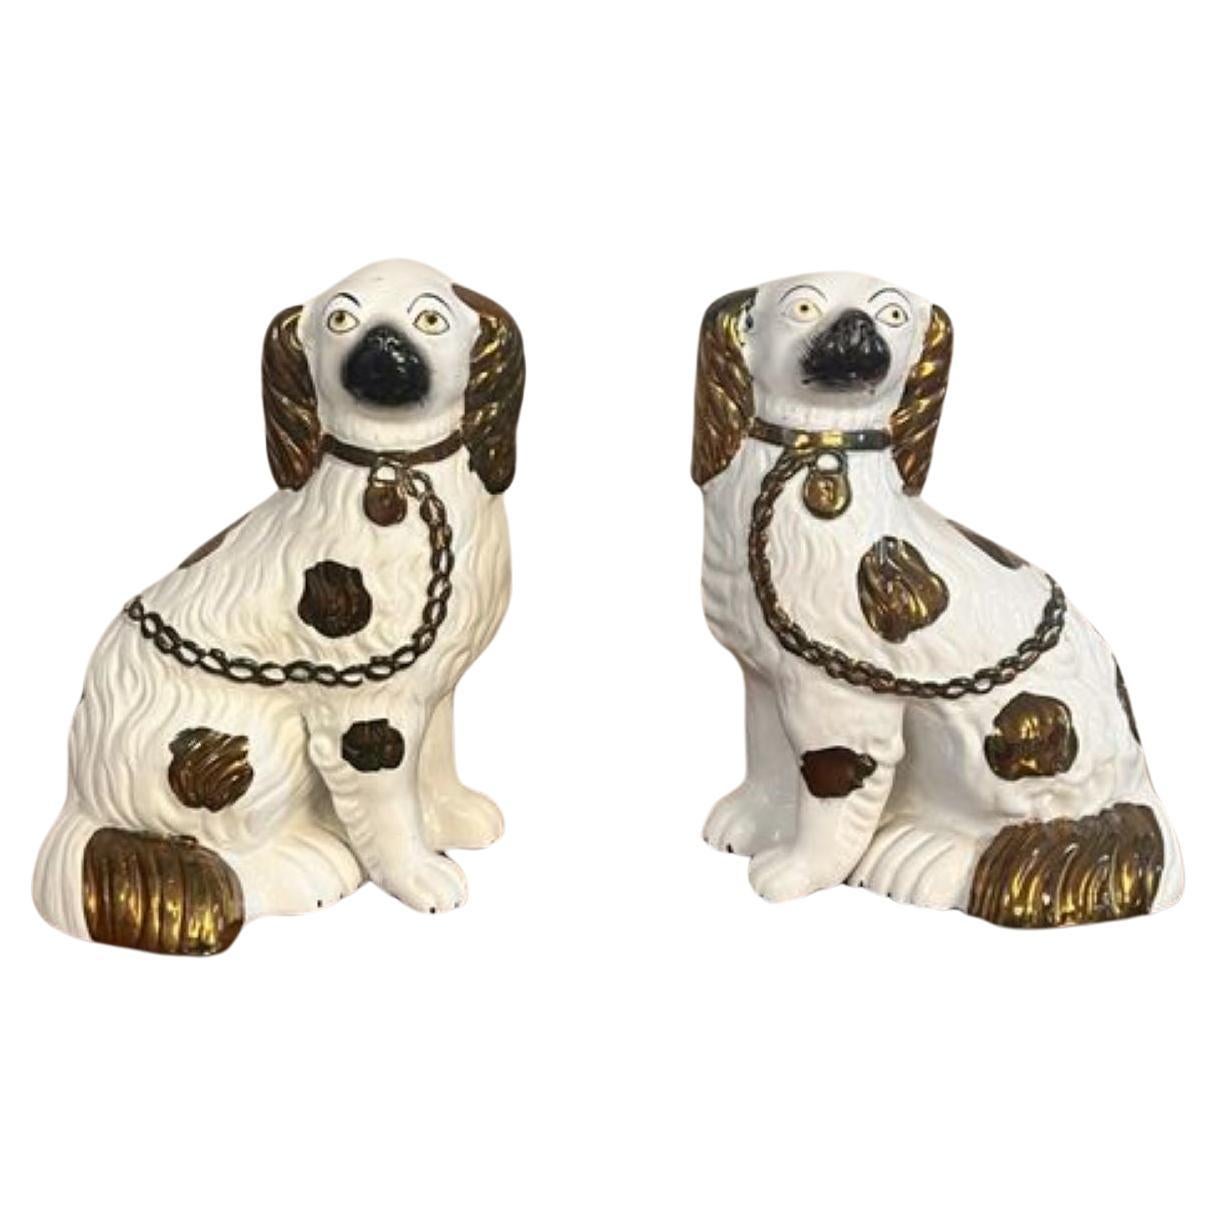 Quality pair of antique Victorian Staffordshire dogs For Sale